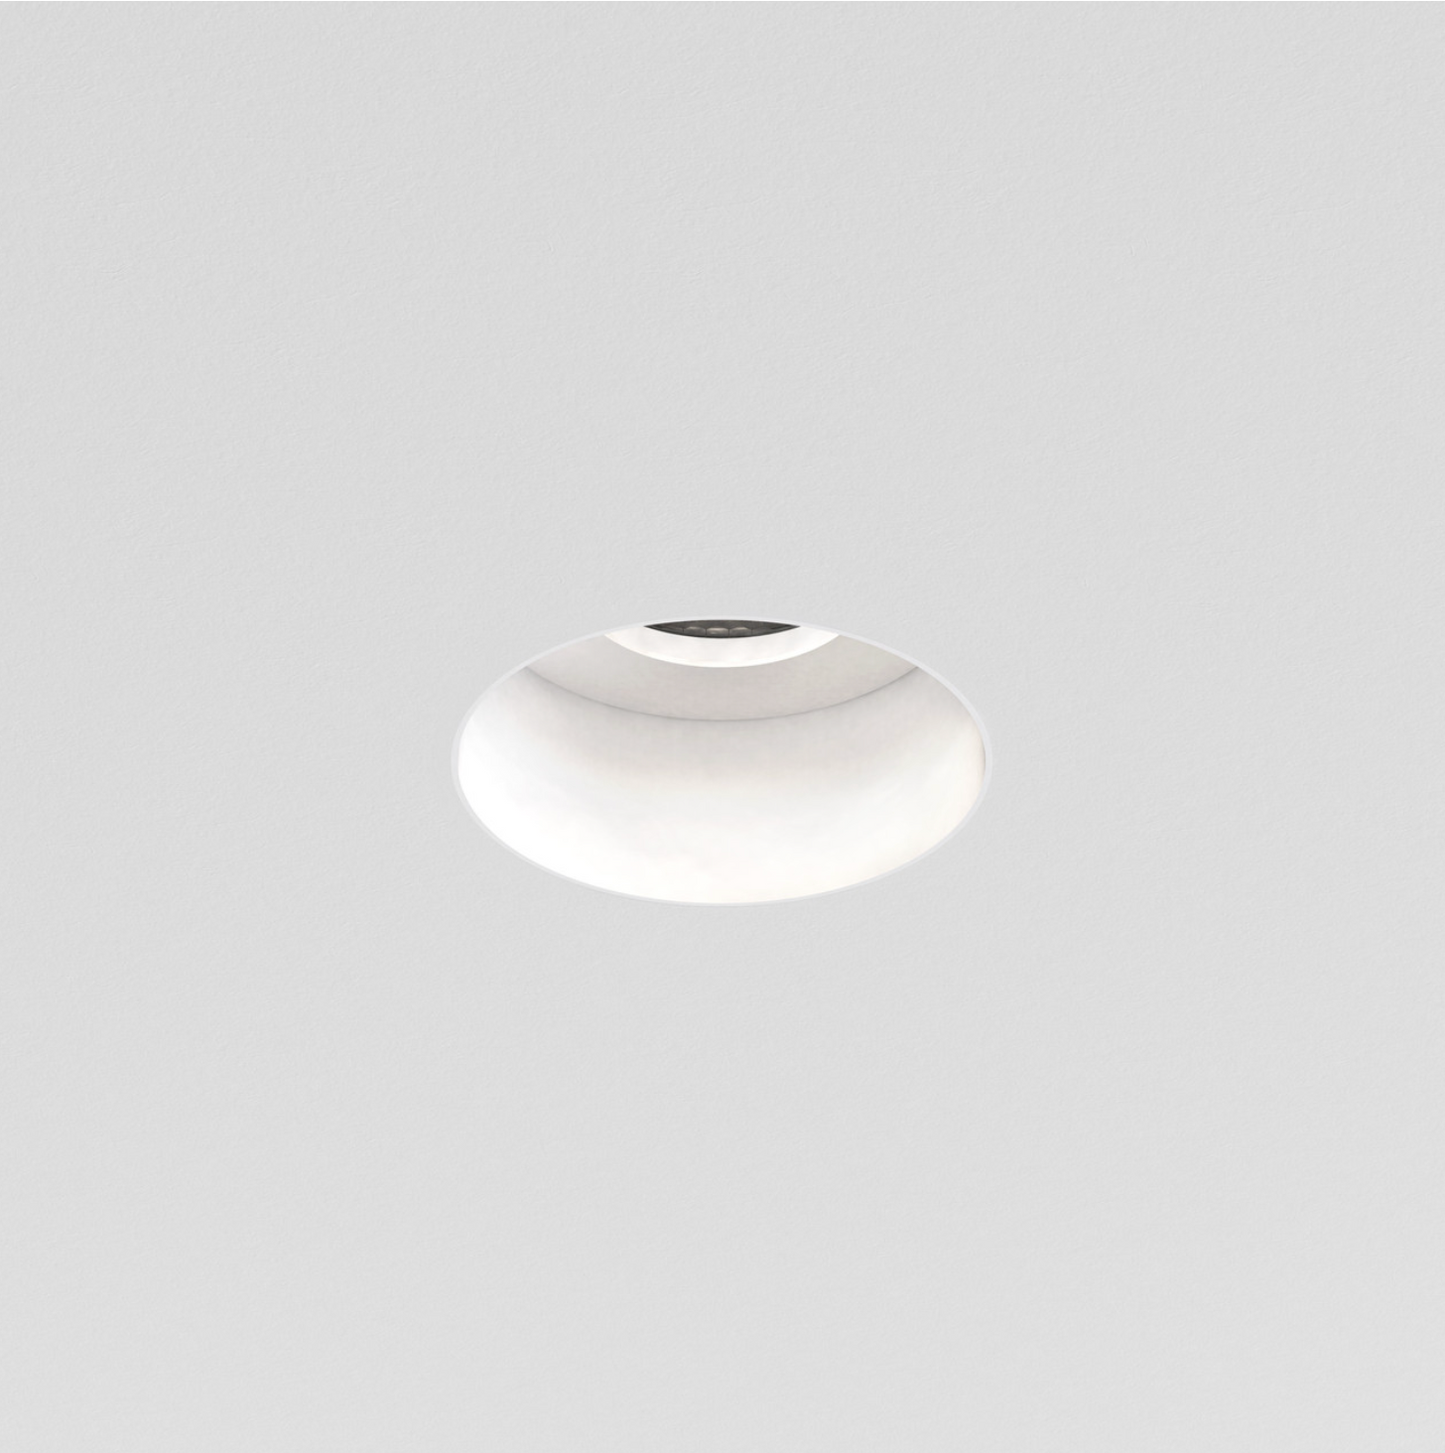 Astro TRIMLESS 5624 LED Recessed Downlight - ID 5624 - CLEARANCE